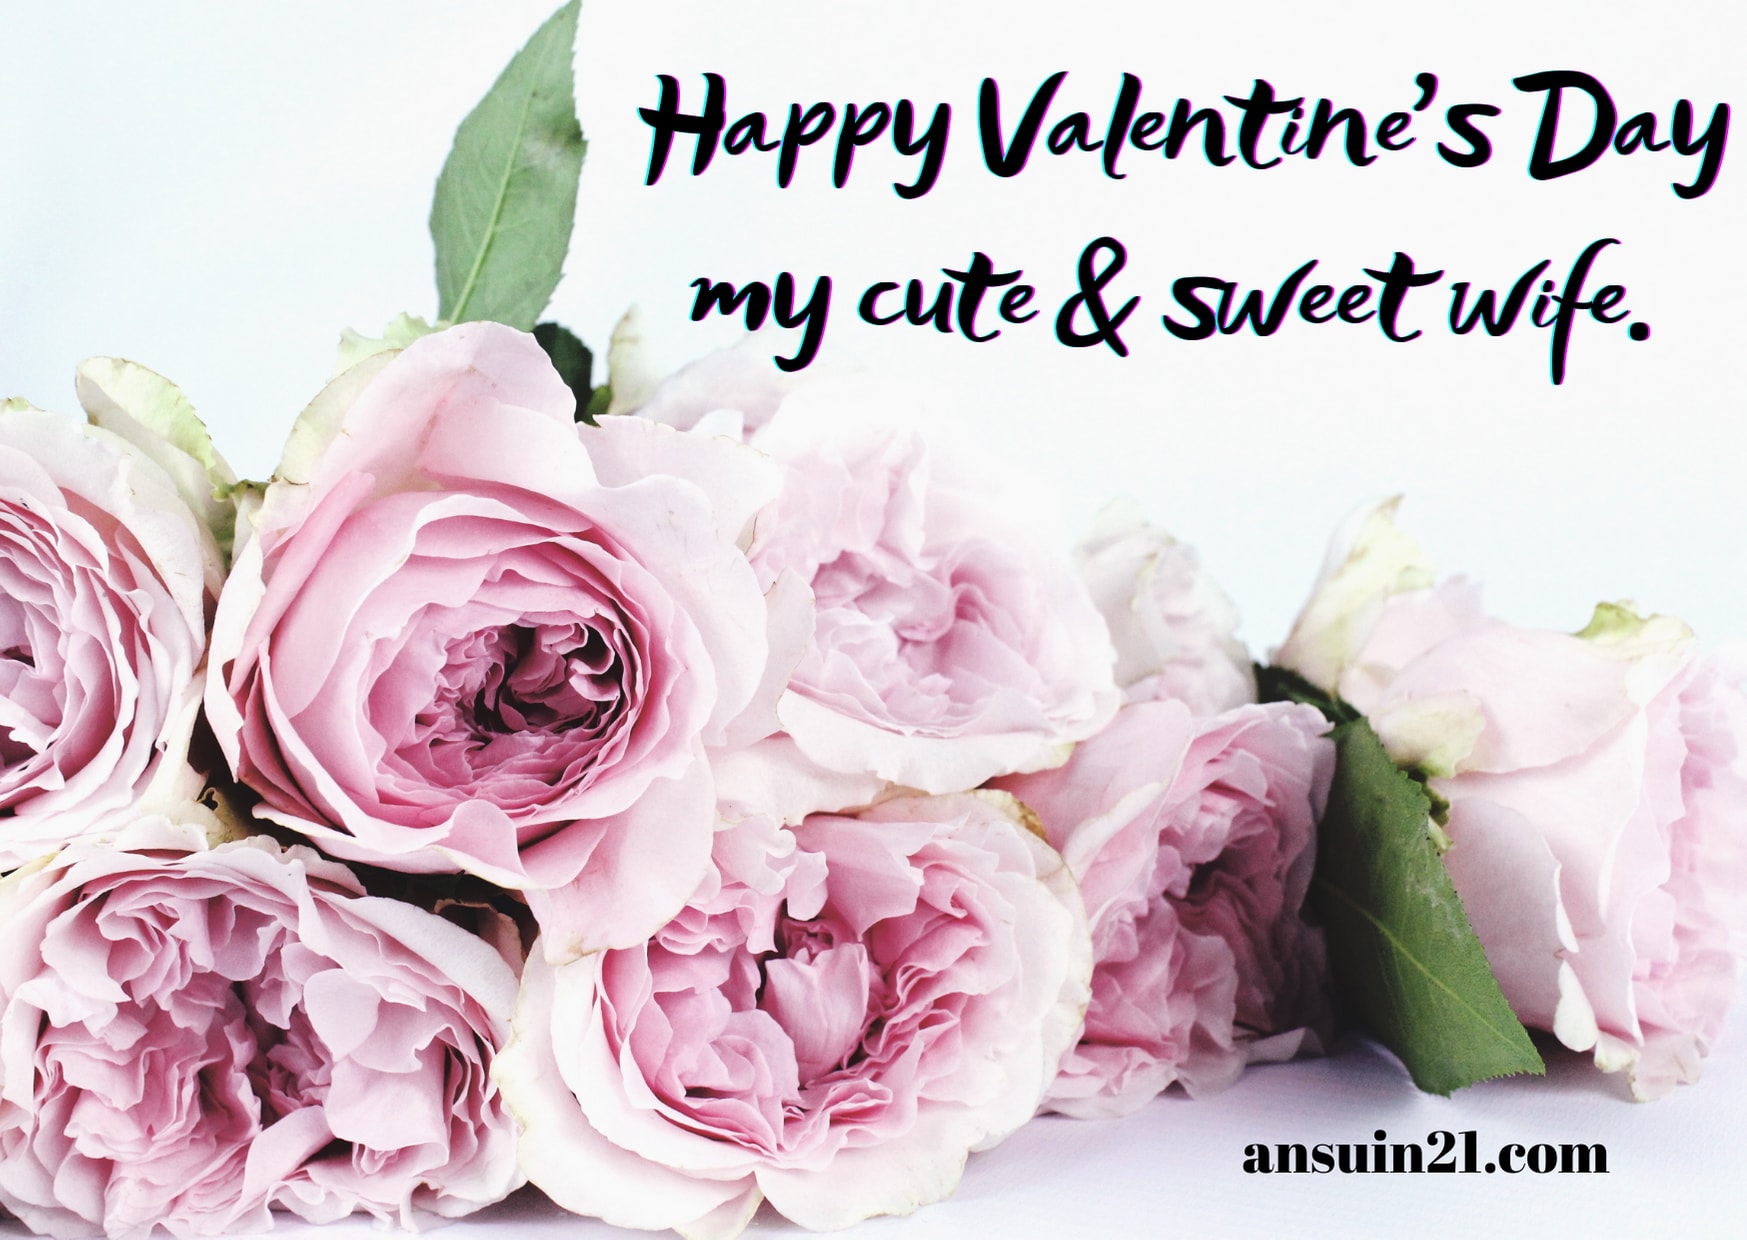 Happy Valentine's Day Wishes, Images & Quotes